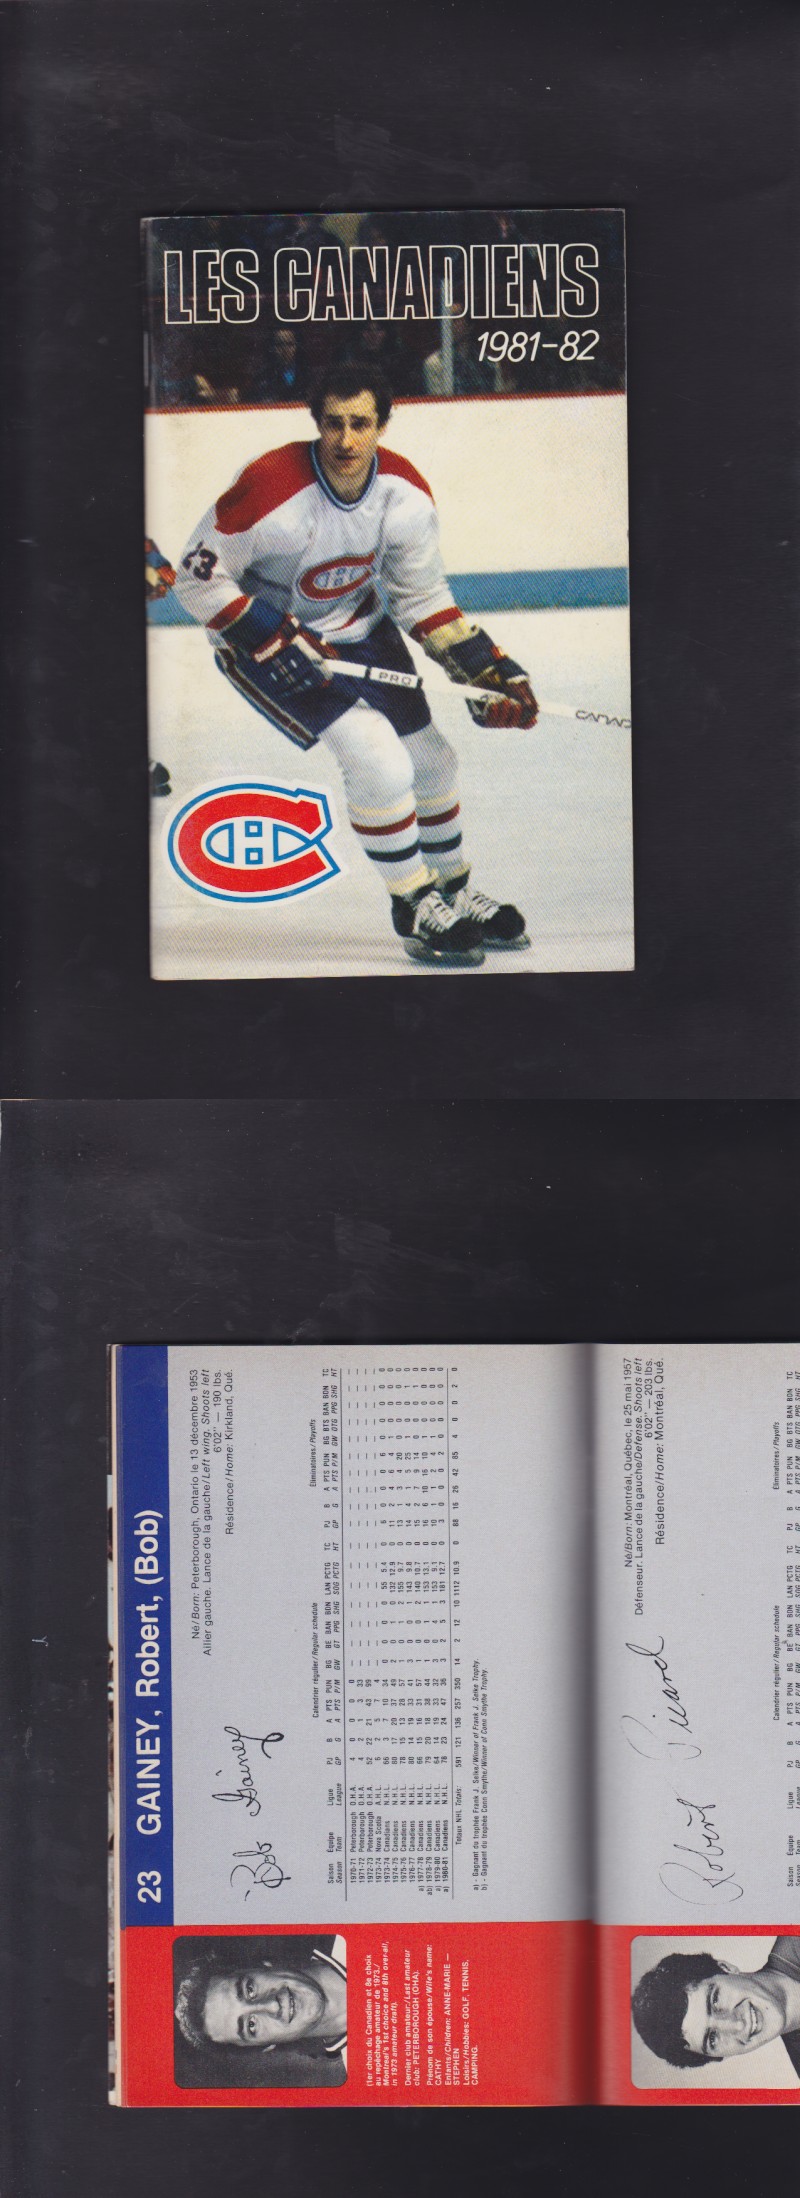 1981-82 MONTREAL CANADIENS YEARBOOK photo